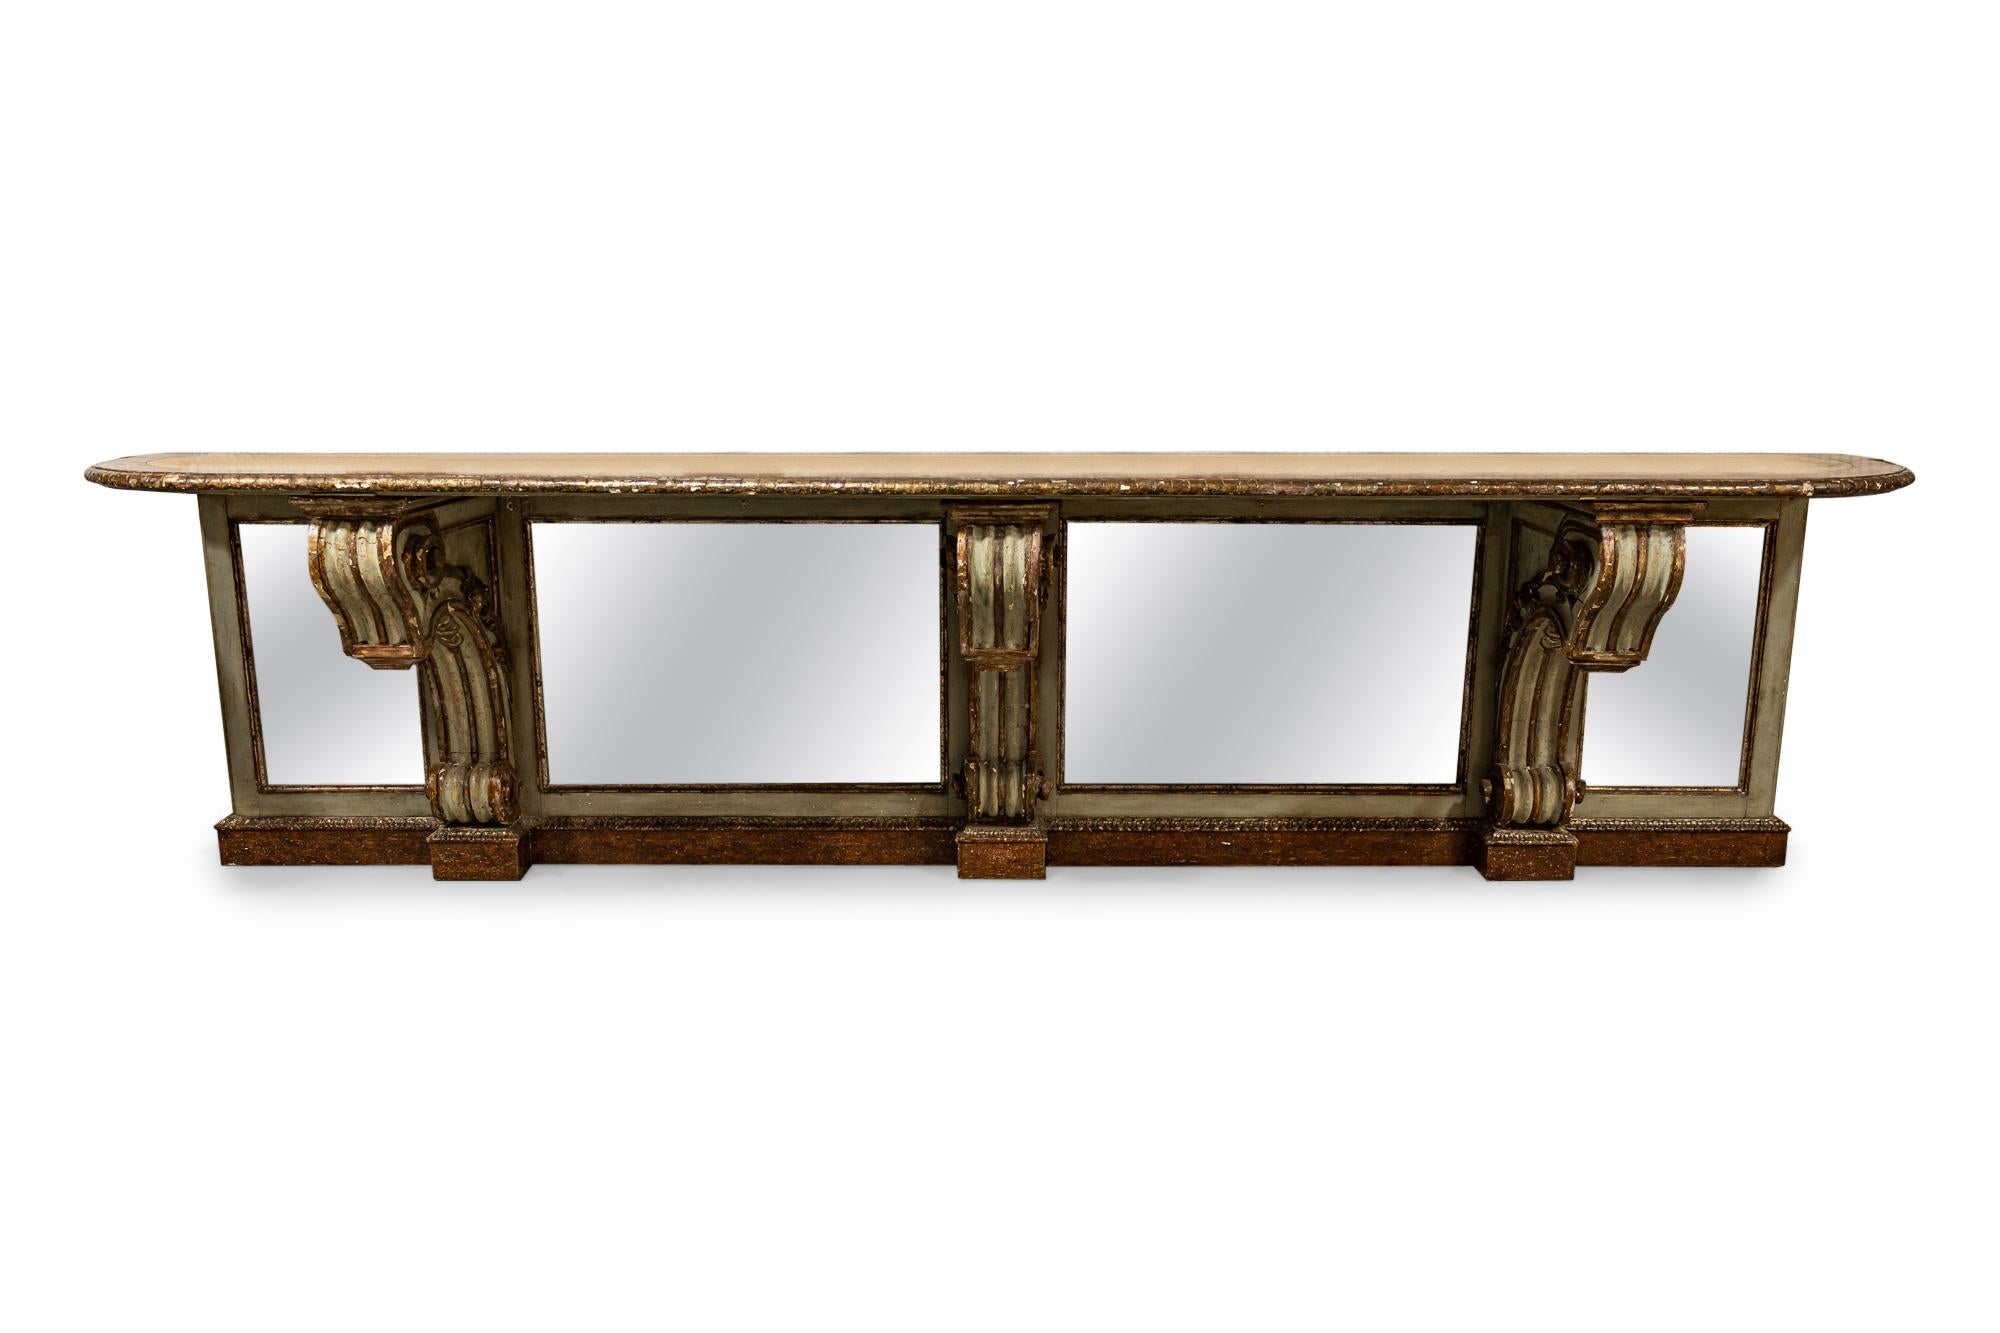 Italian Rococo-style (18th Century possibly Venetian) monumental console table with 4 mirrored panels separated by 3 large carved scrolls having a gilt, green, and off-white painted finish.